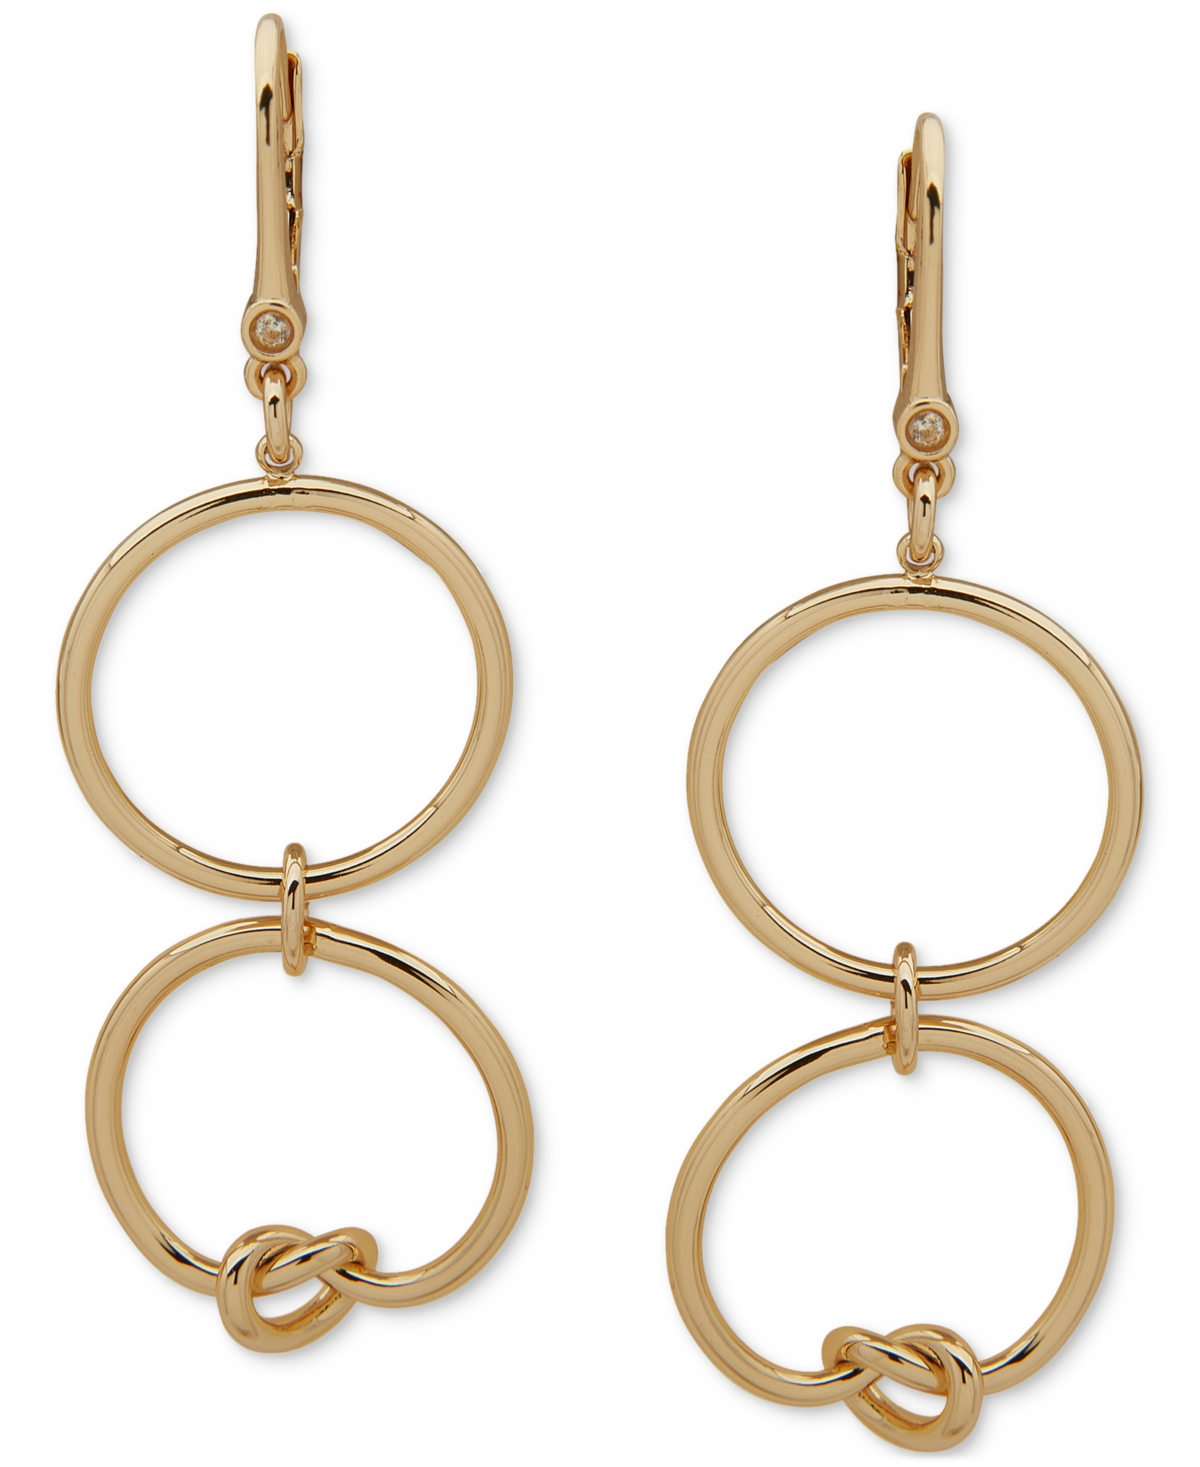 Dkny Gold-tone Knotted Circle Double Drop Earrings